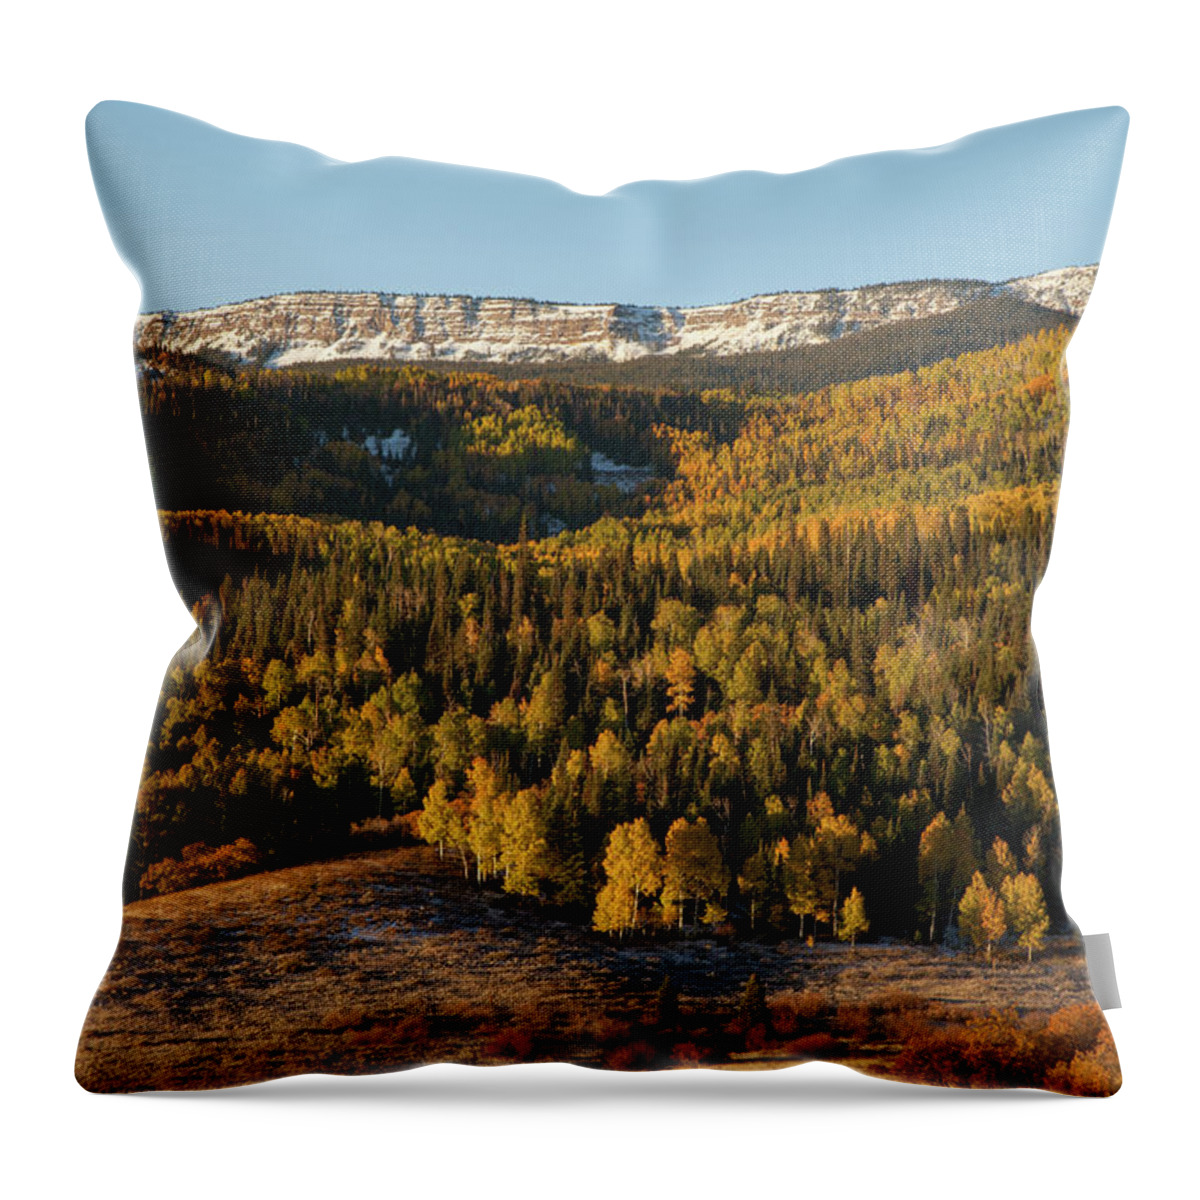 Tranquility Throw Pillow featuring the photograph Fall Foliage And Snow-dusted Peaks by Karen Desjardin